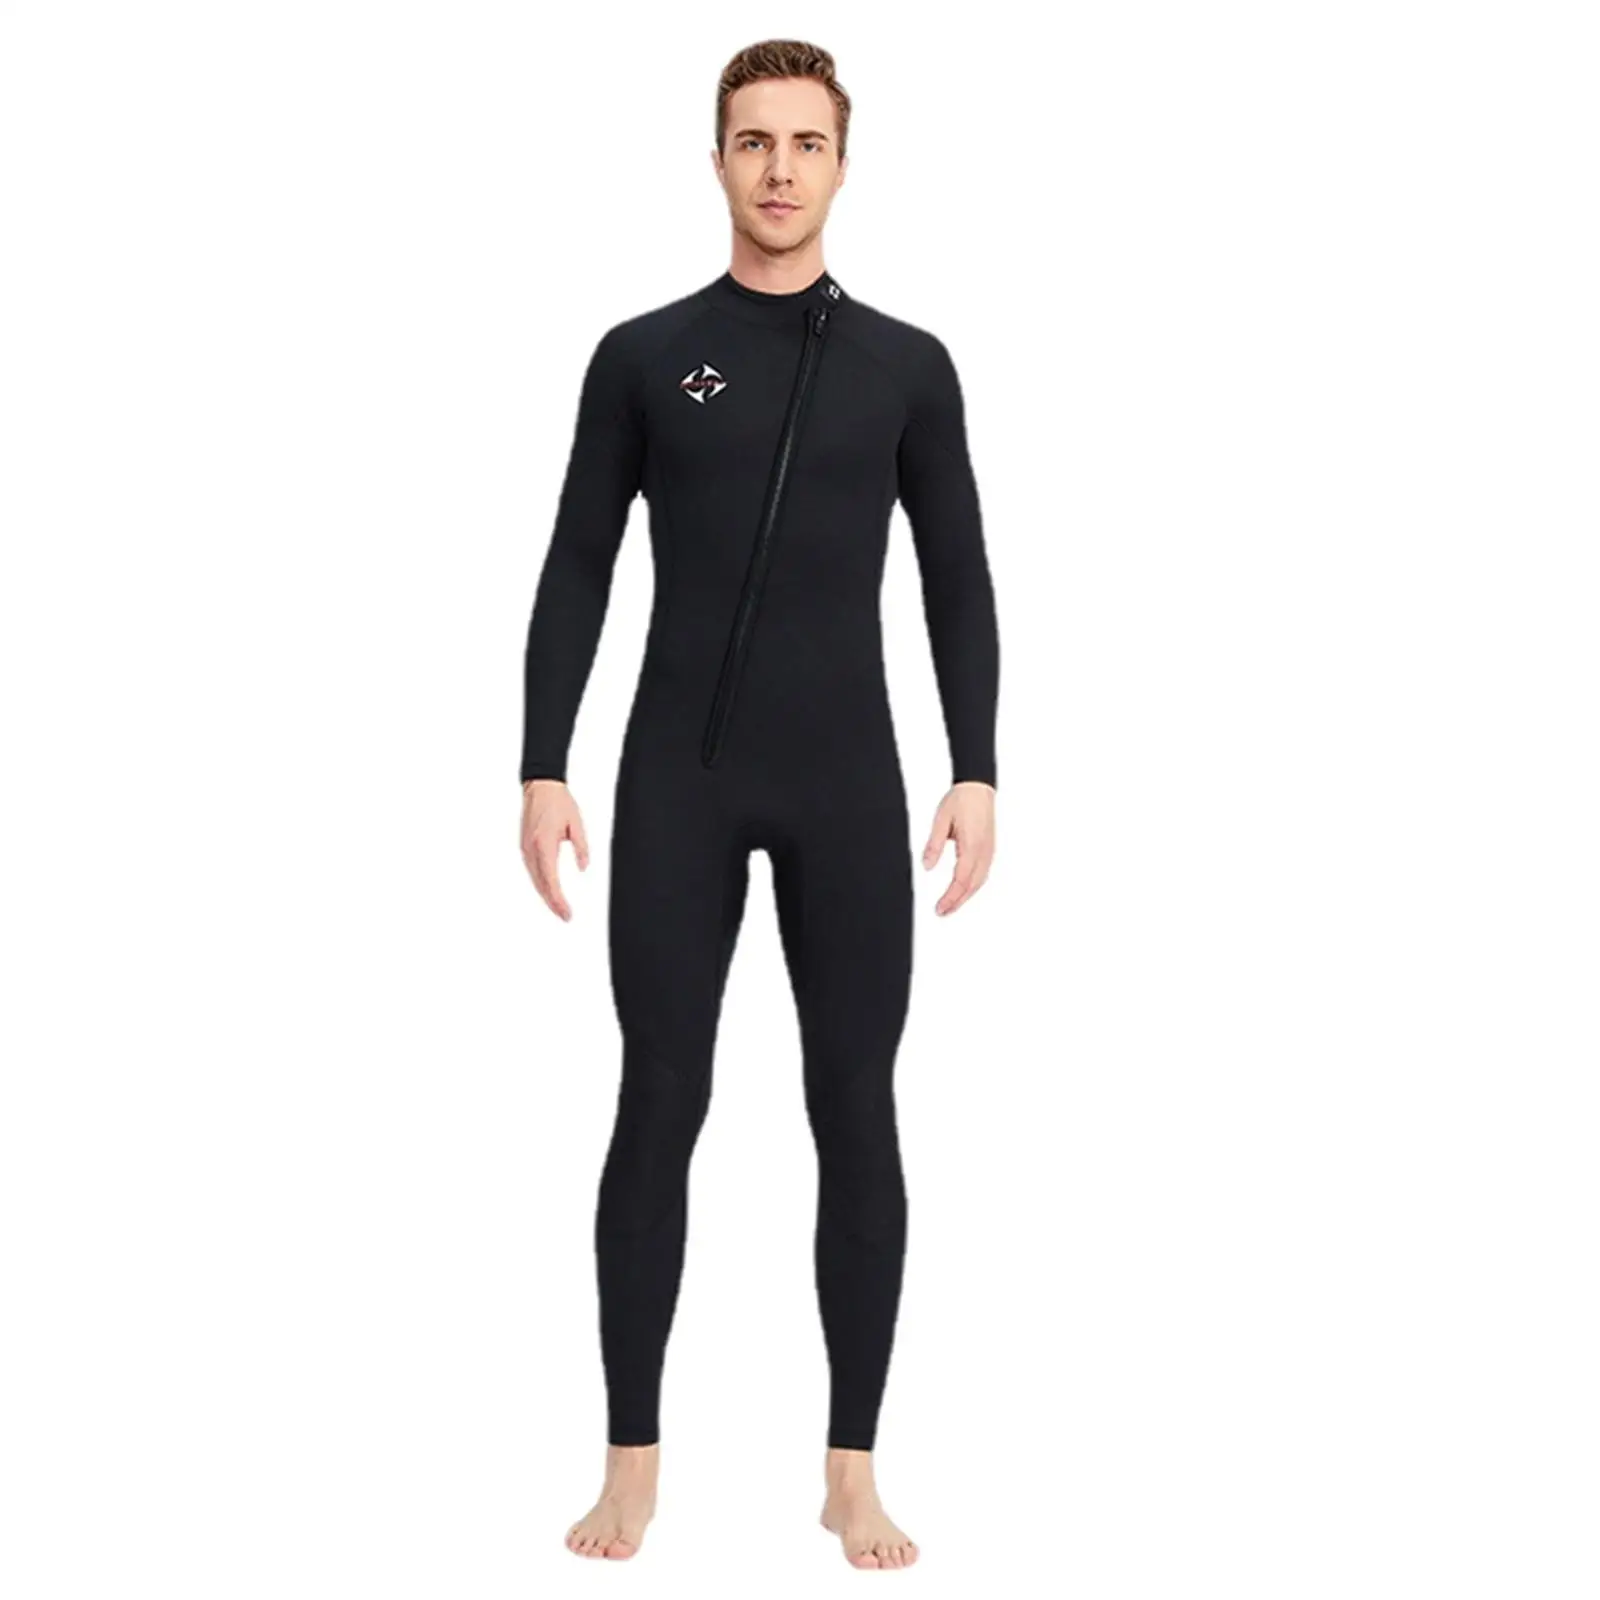 Diving Wetsuit Stretchy Full Body Wet Suit Dive Skin Quickly Drying